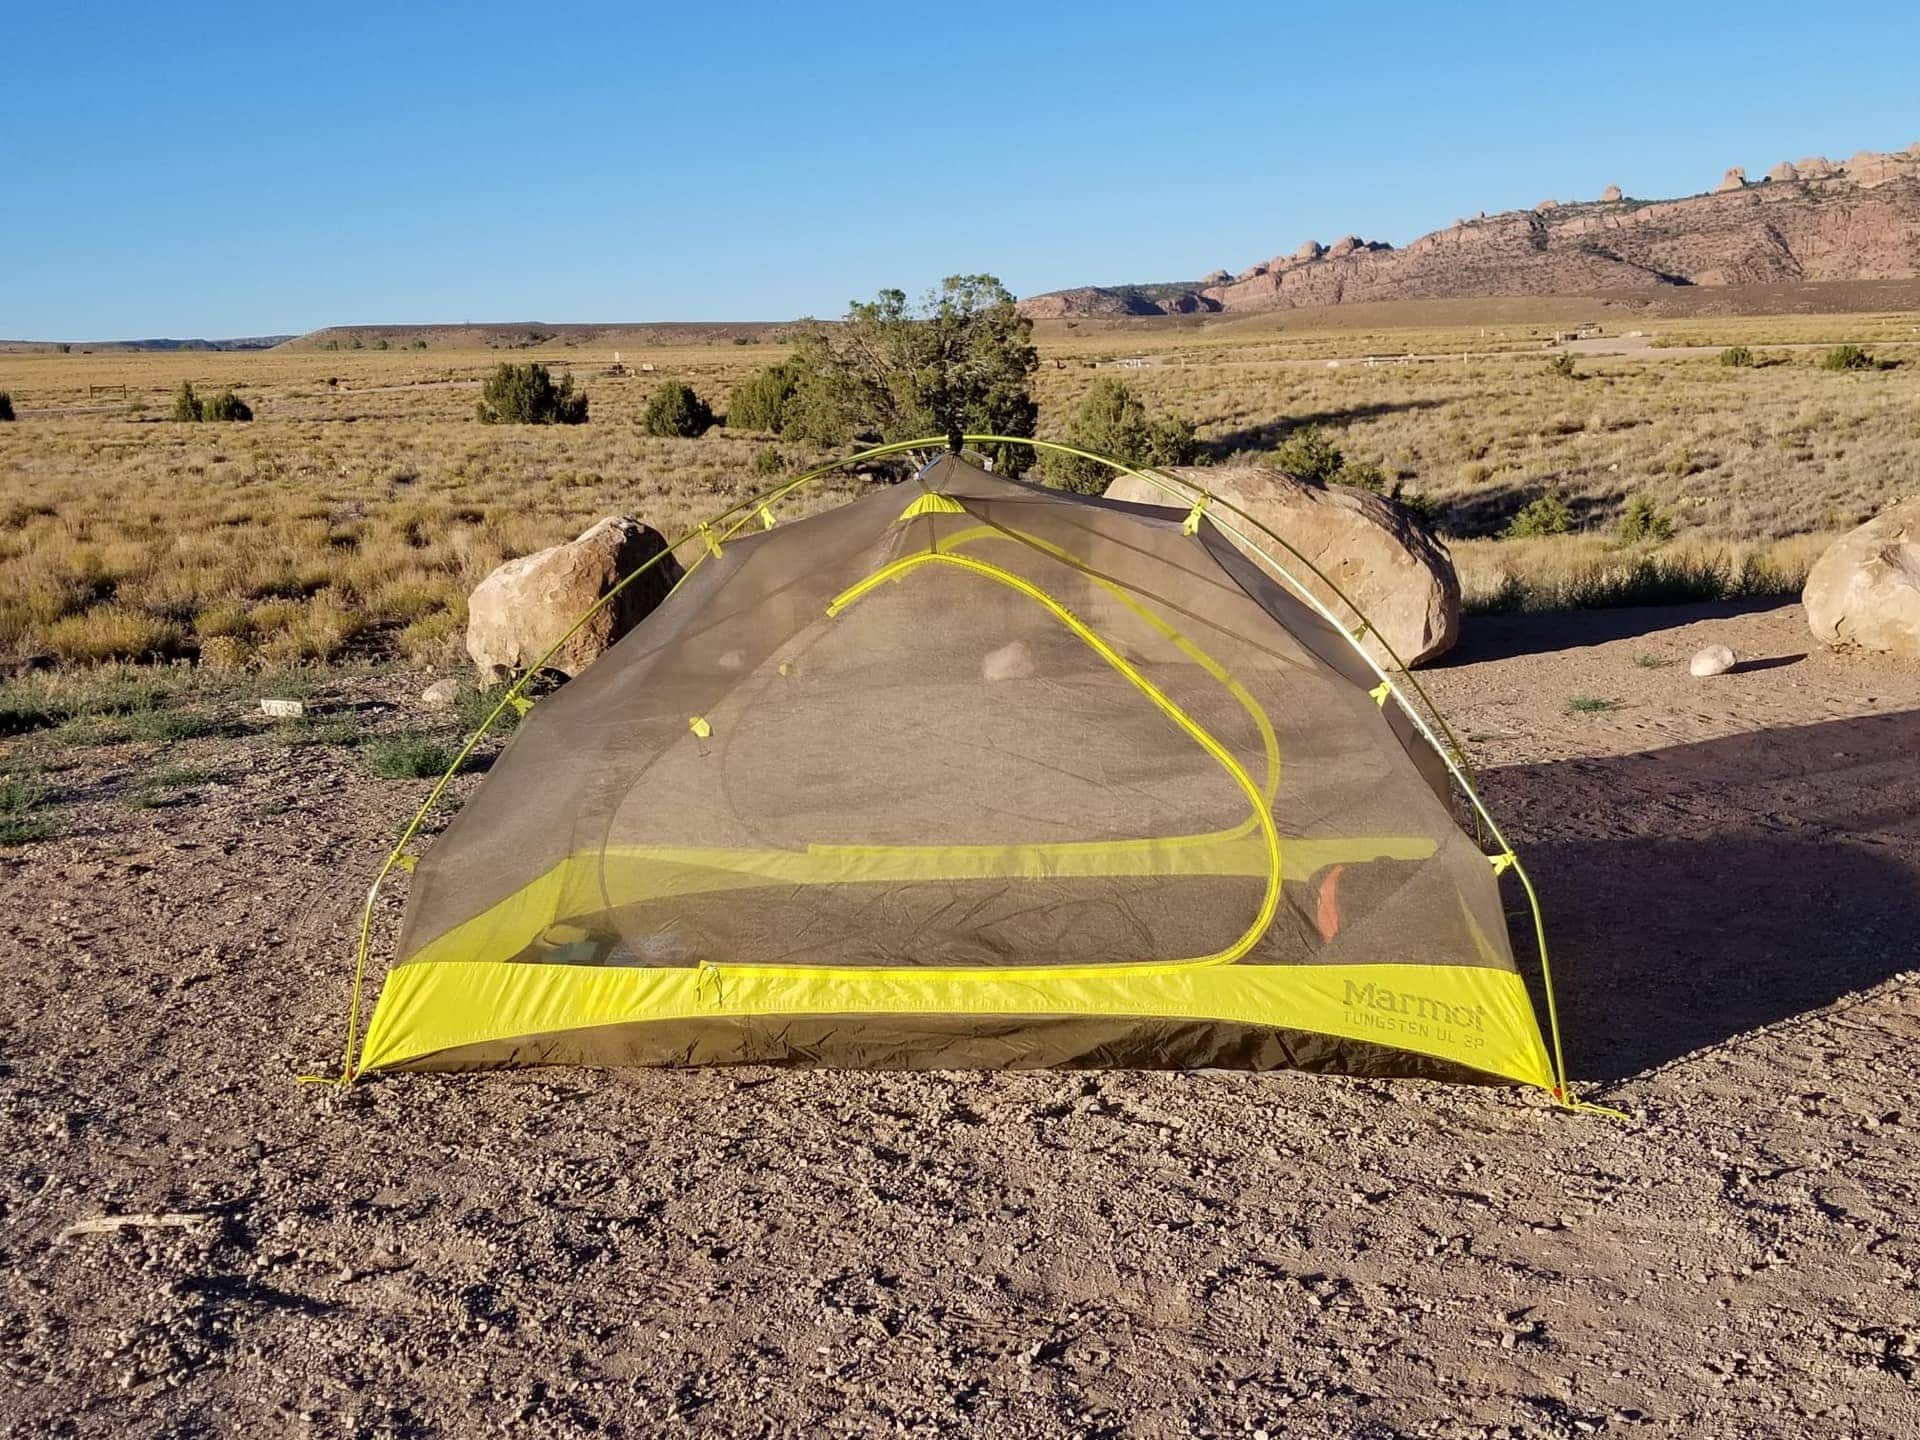 Our tent is set up at Ken's Lake Campground in Moab, UT